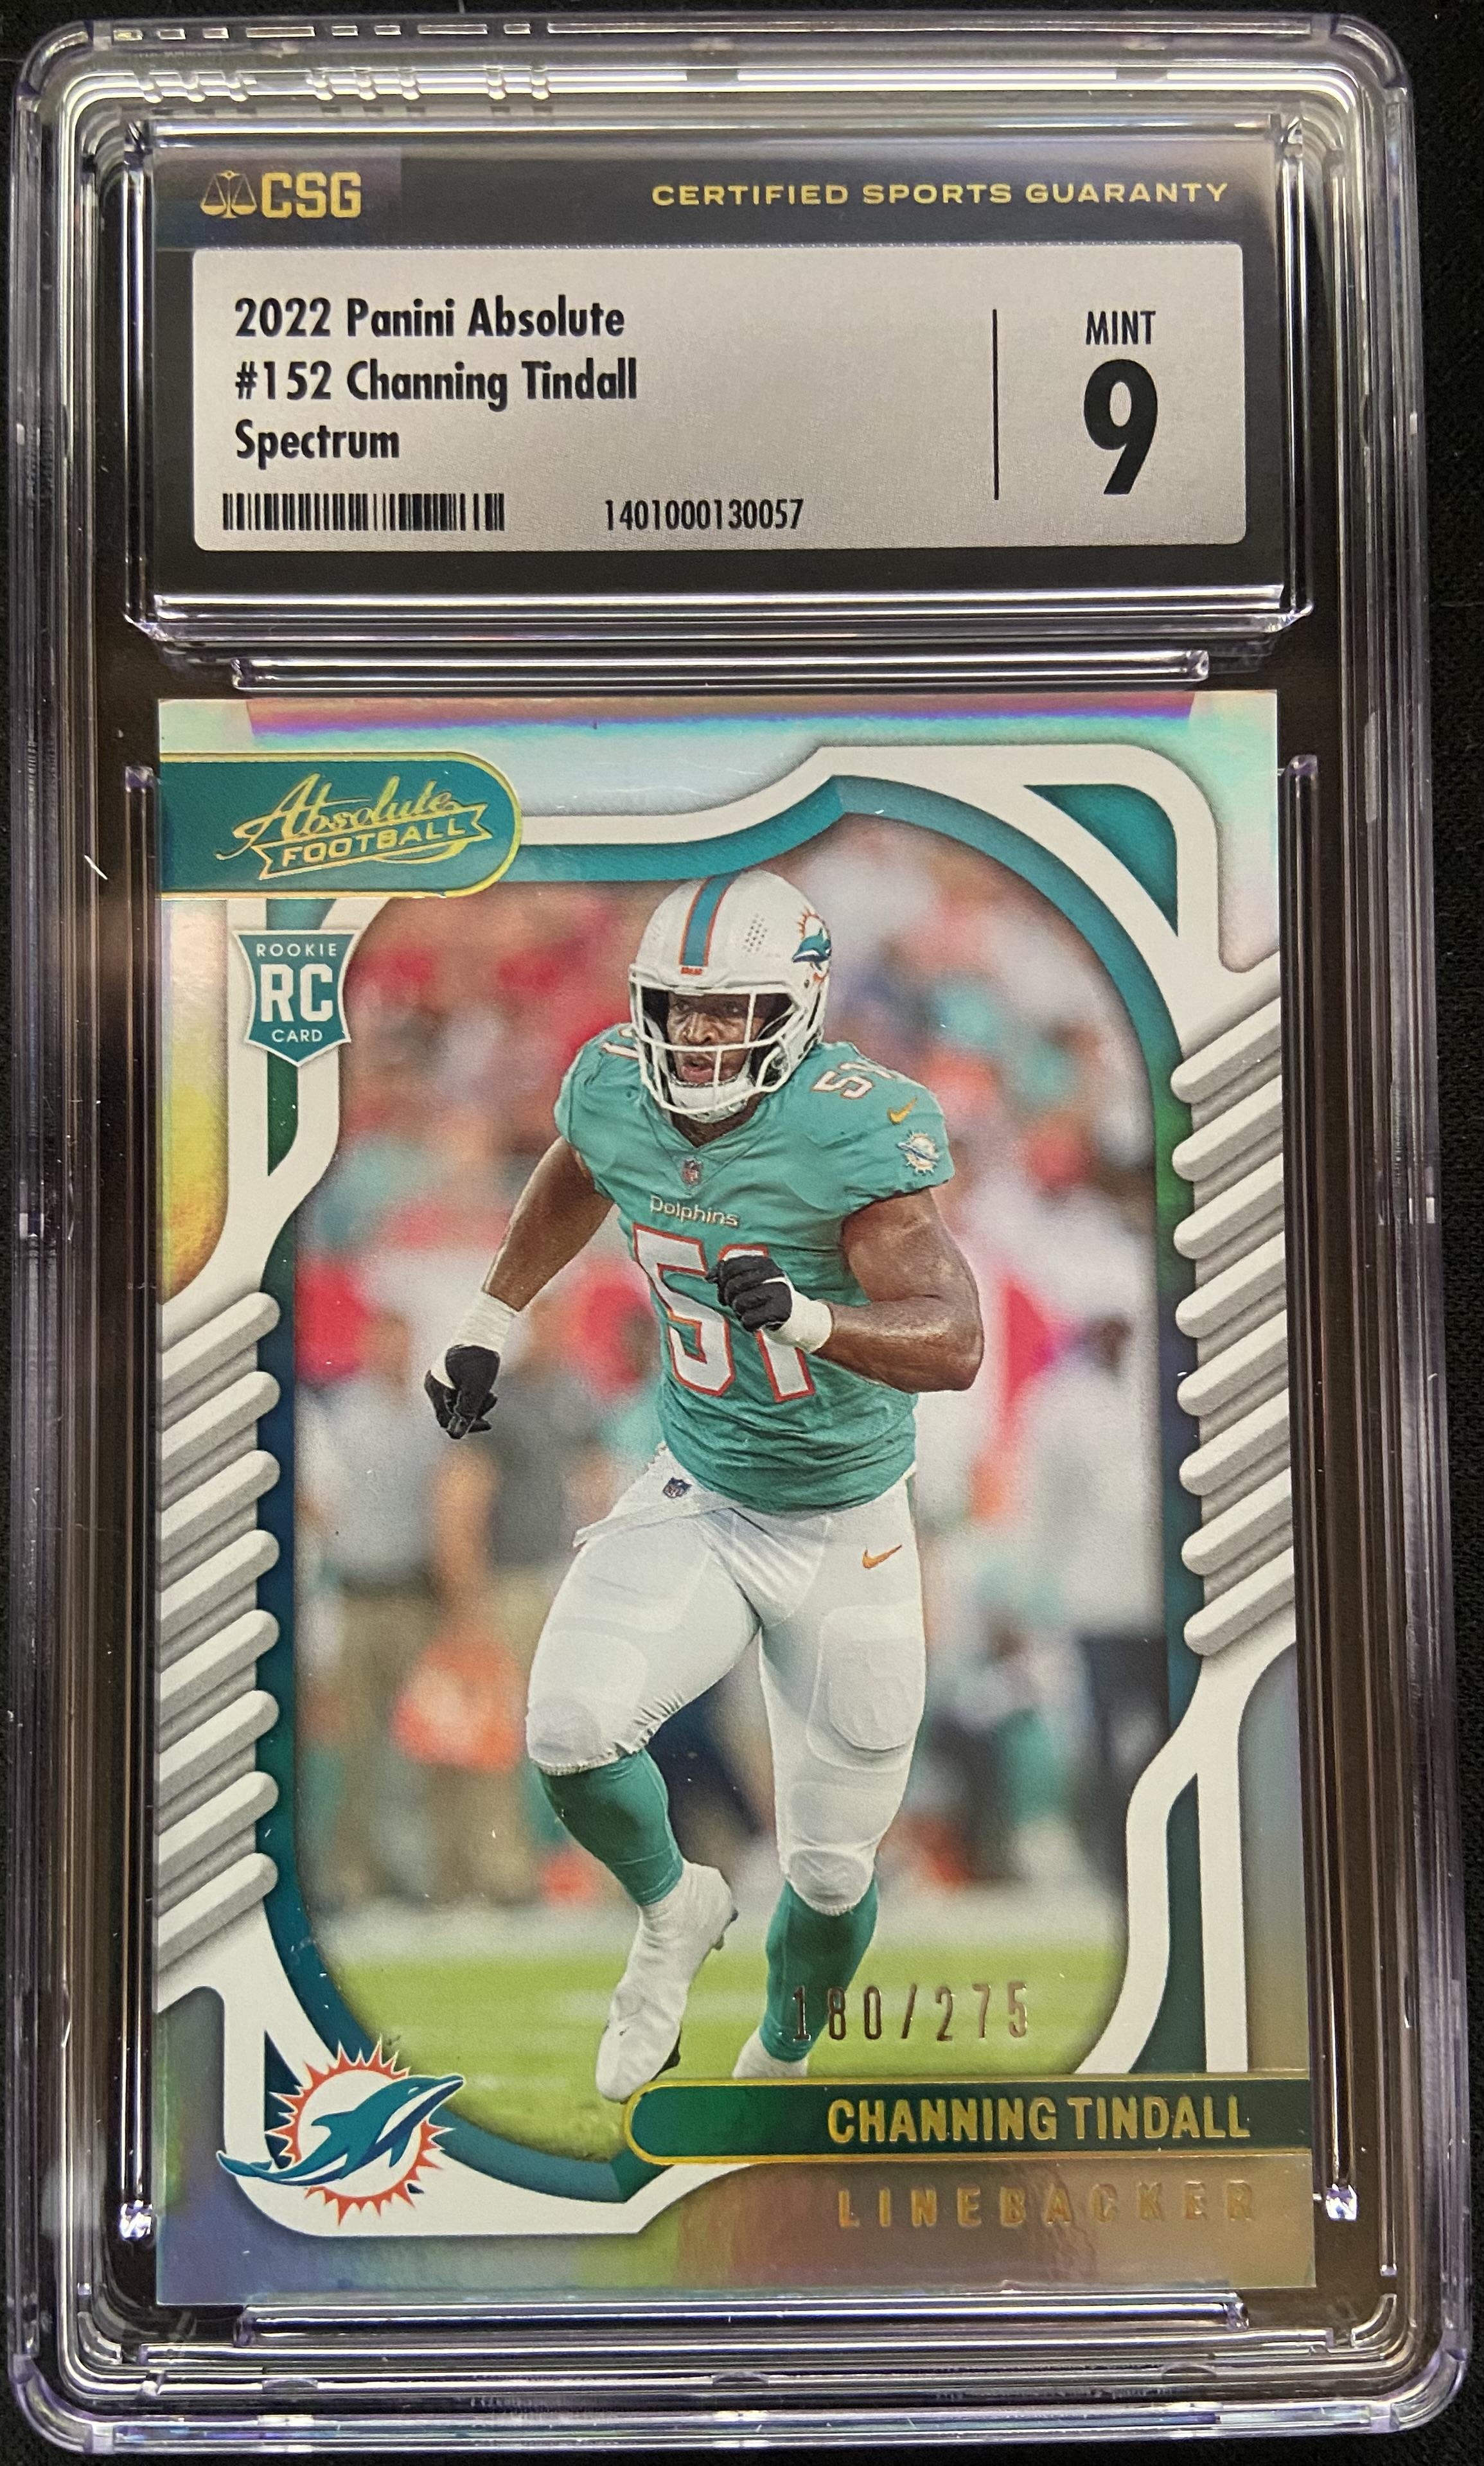 Panini Absolute Channing Tindall /275 CSG 9